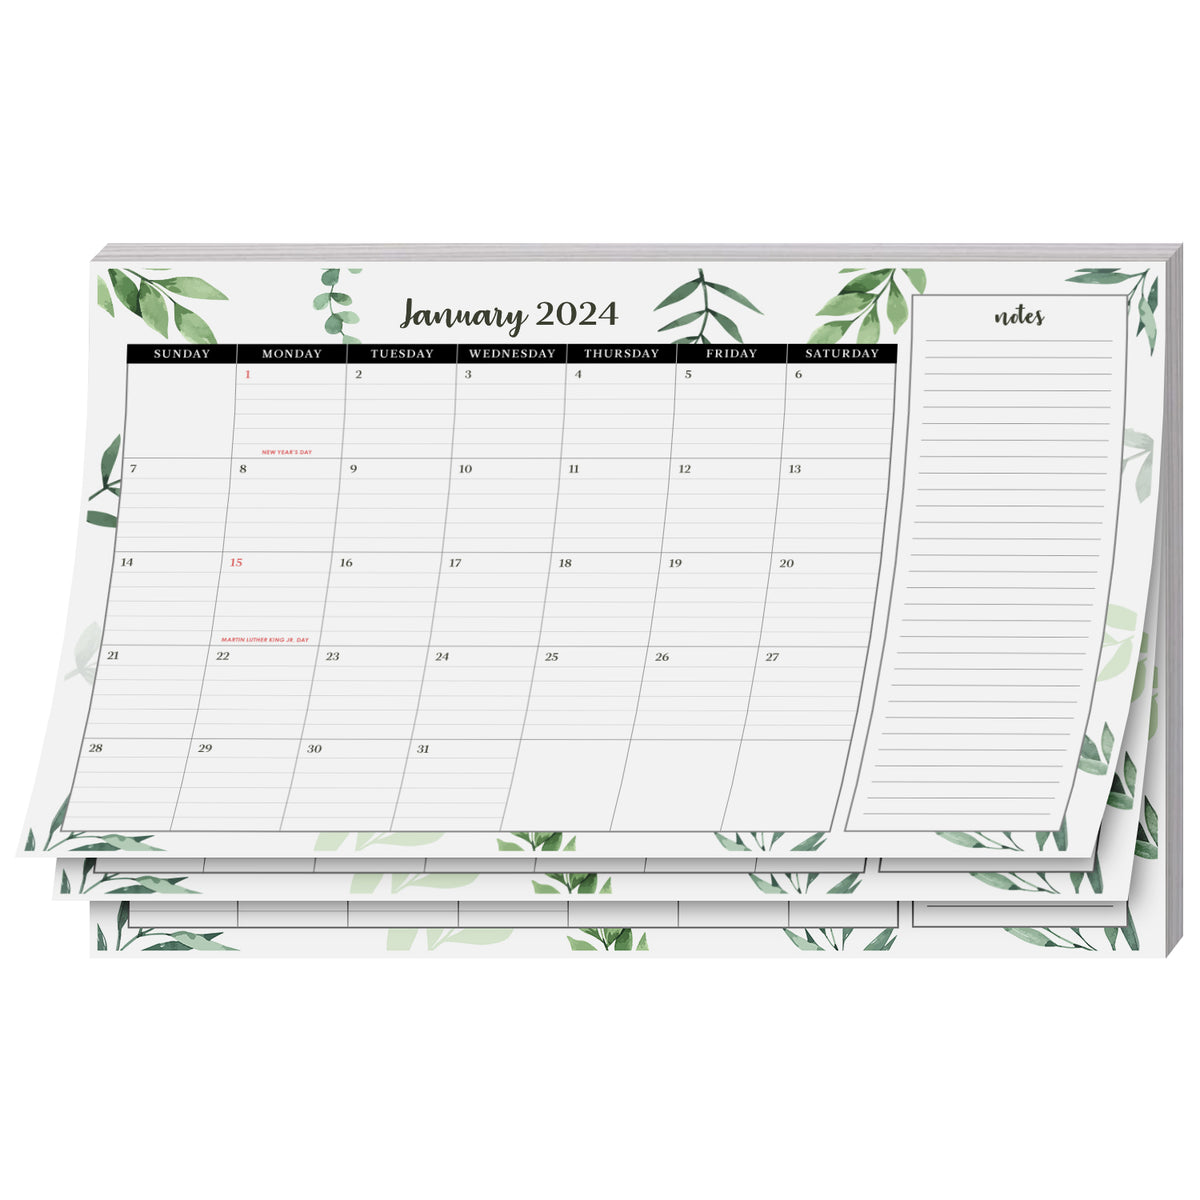 2024 Desk Year Calendar Desktop or Wall Planner, Tear-Off Pad for Easy Planning, Includes a Notes Section To Do's for the Year of 2024